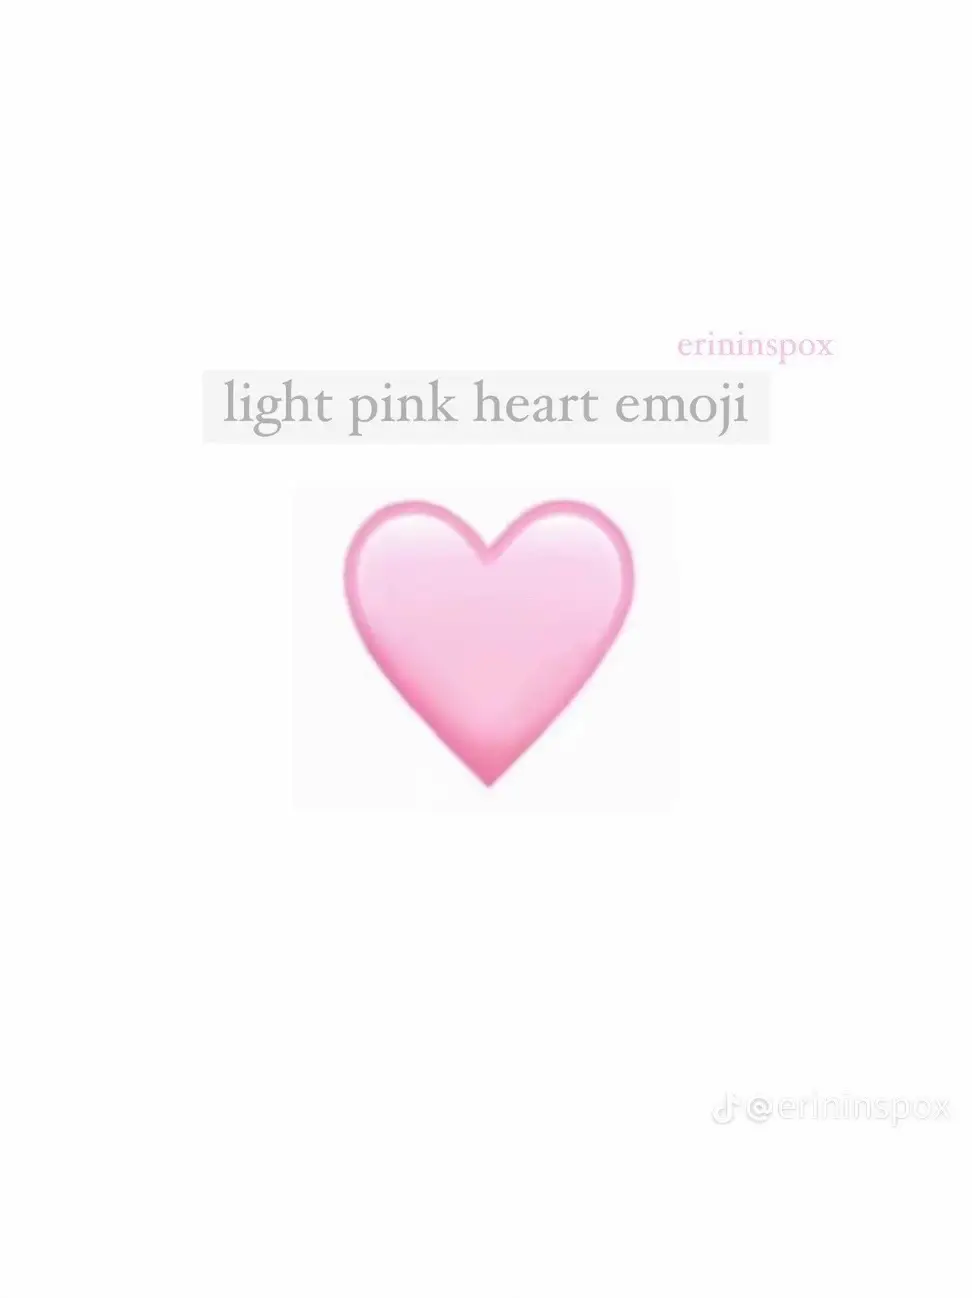 Pink Heart Emoji Meaning from A Girl - Lemon8 Search